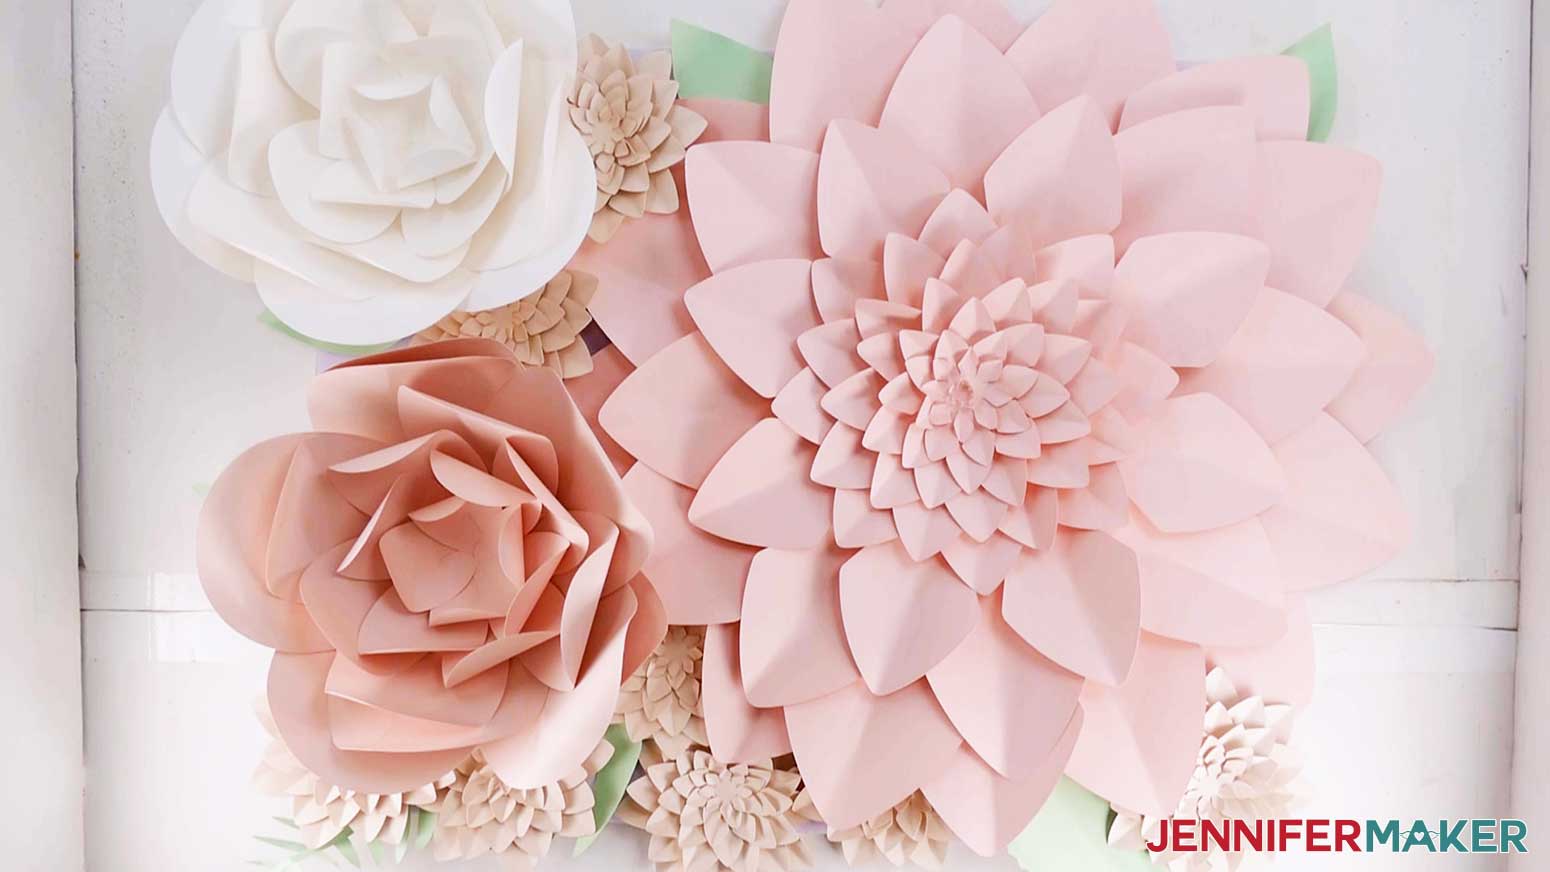 A test layout featuring the jumbo broad dahlia for the paper flower backdrop.